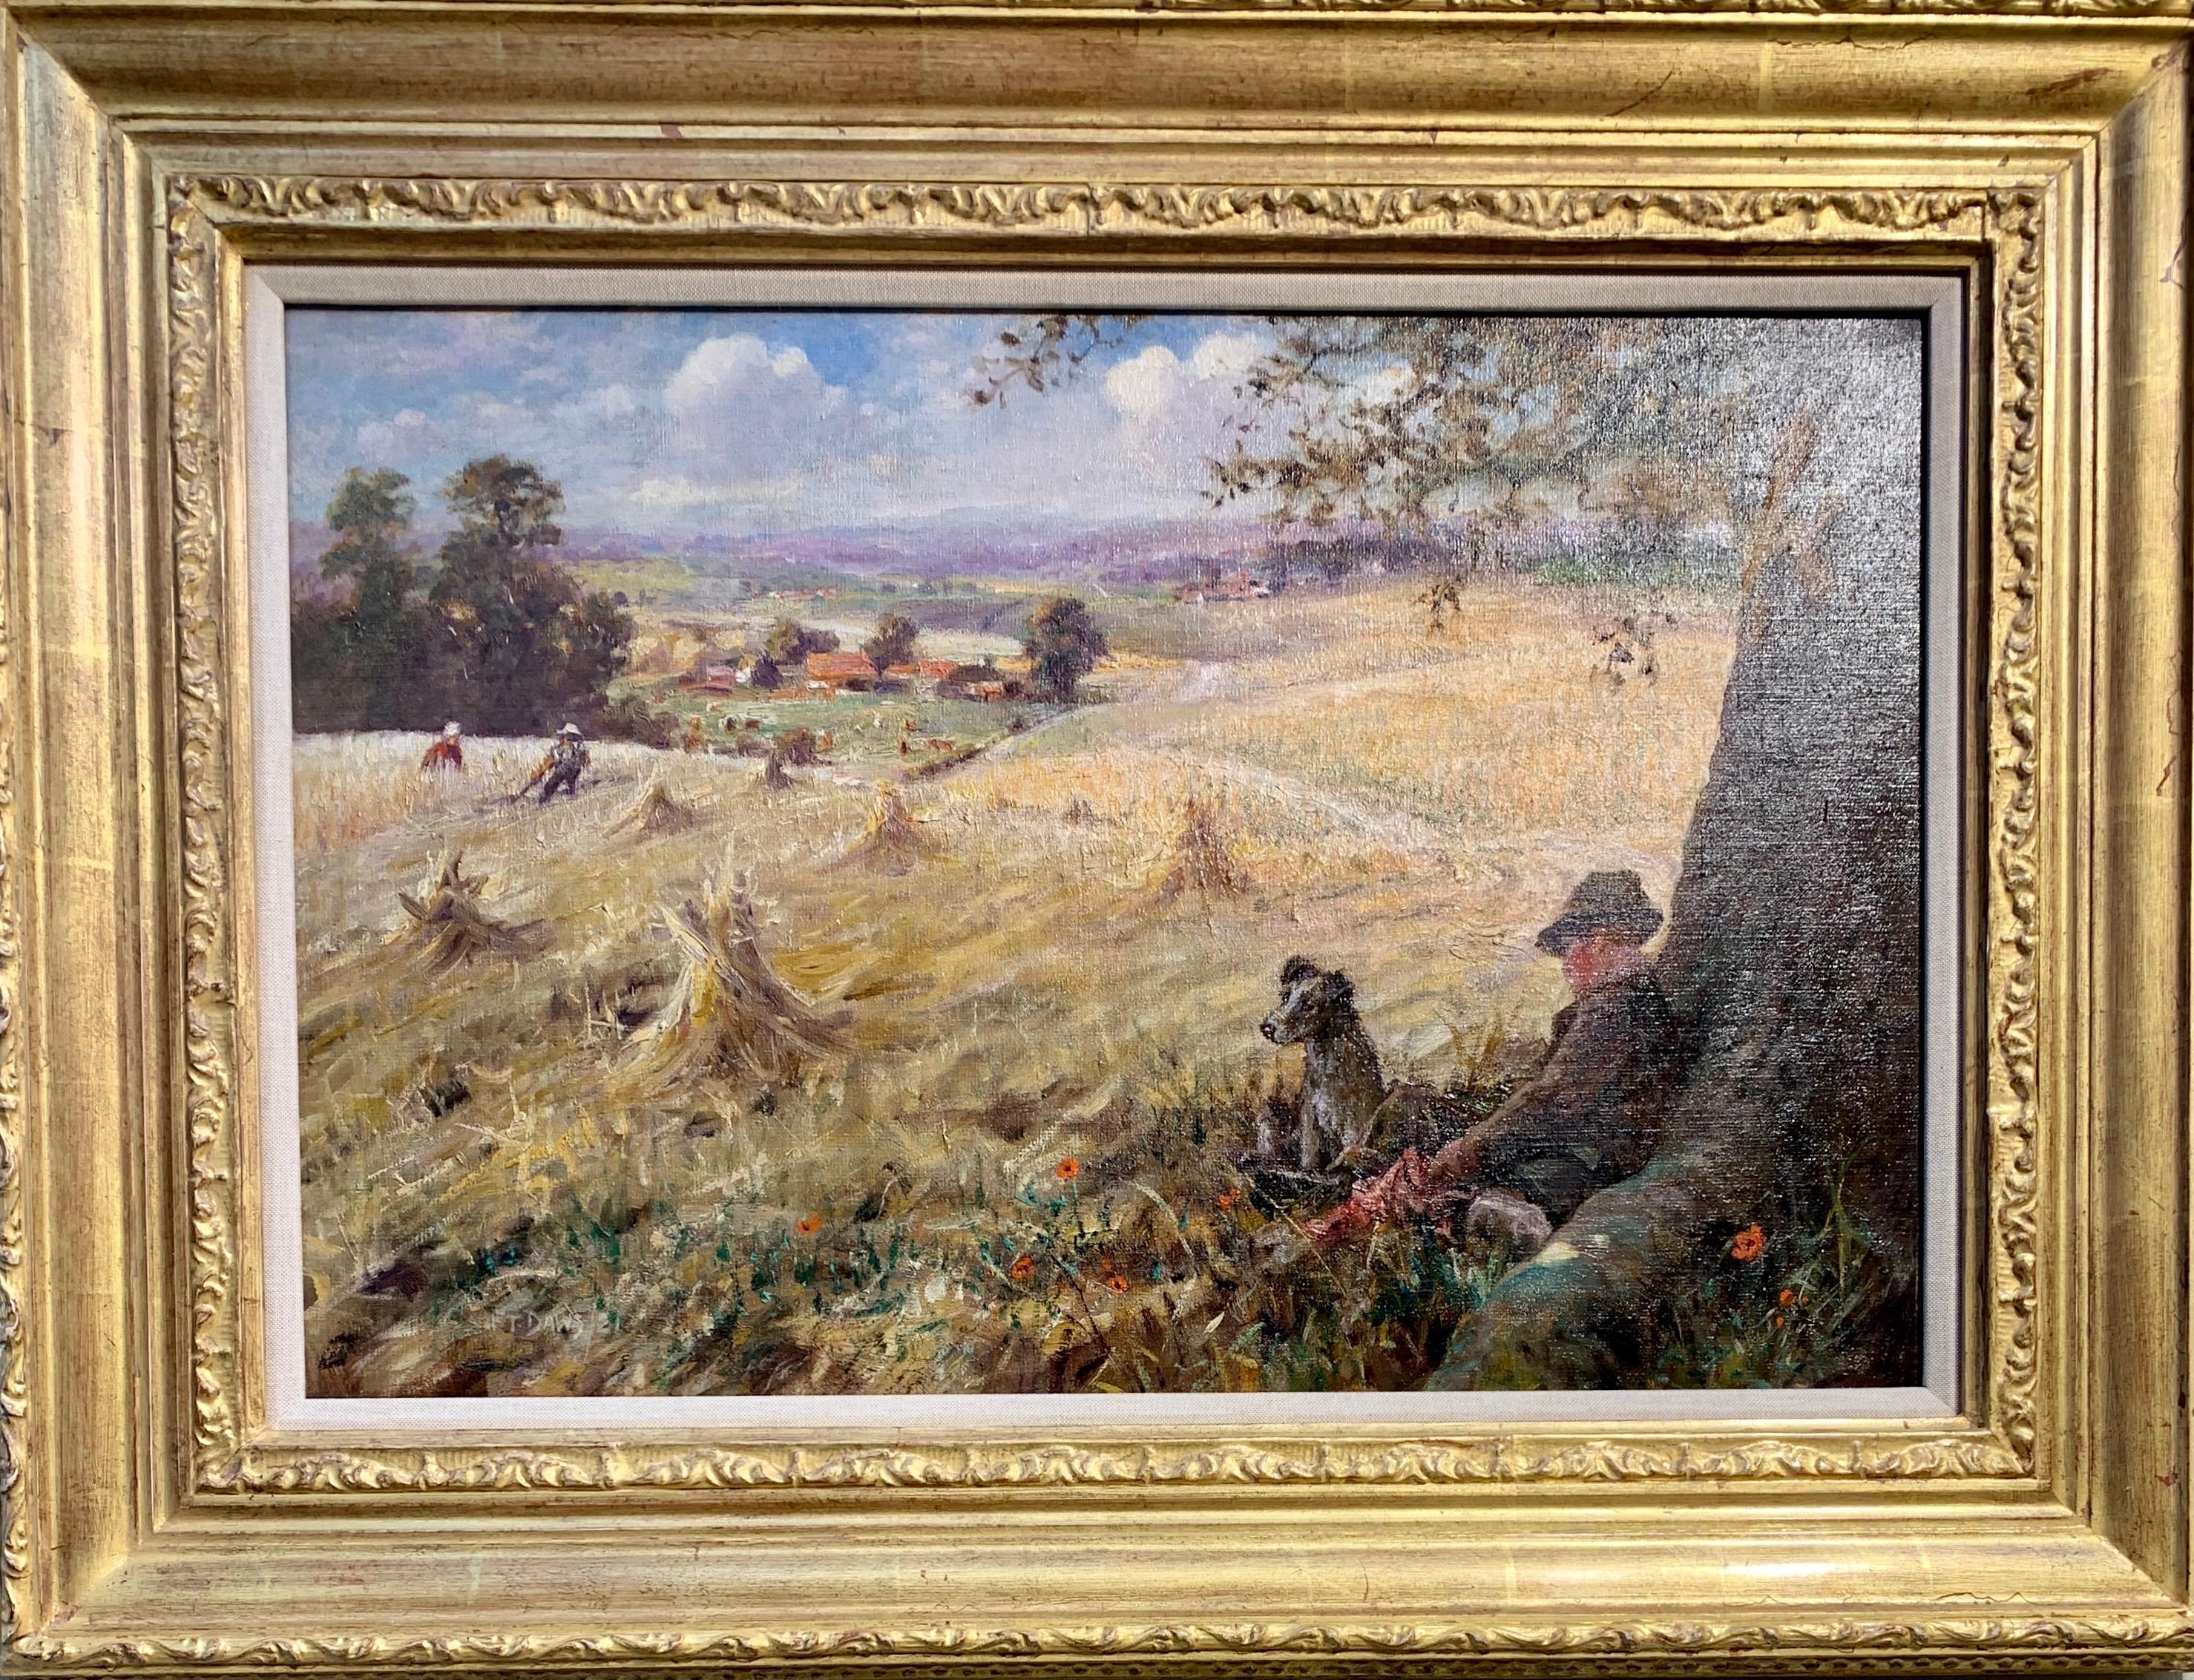 Frederick Thomas Daws Landscape Painting - 1920's Antique English Impressionist harvest landscape with man and his dog.